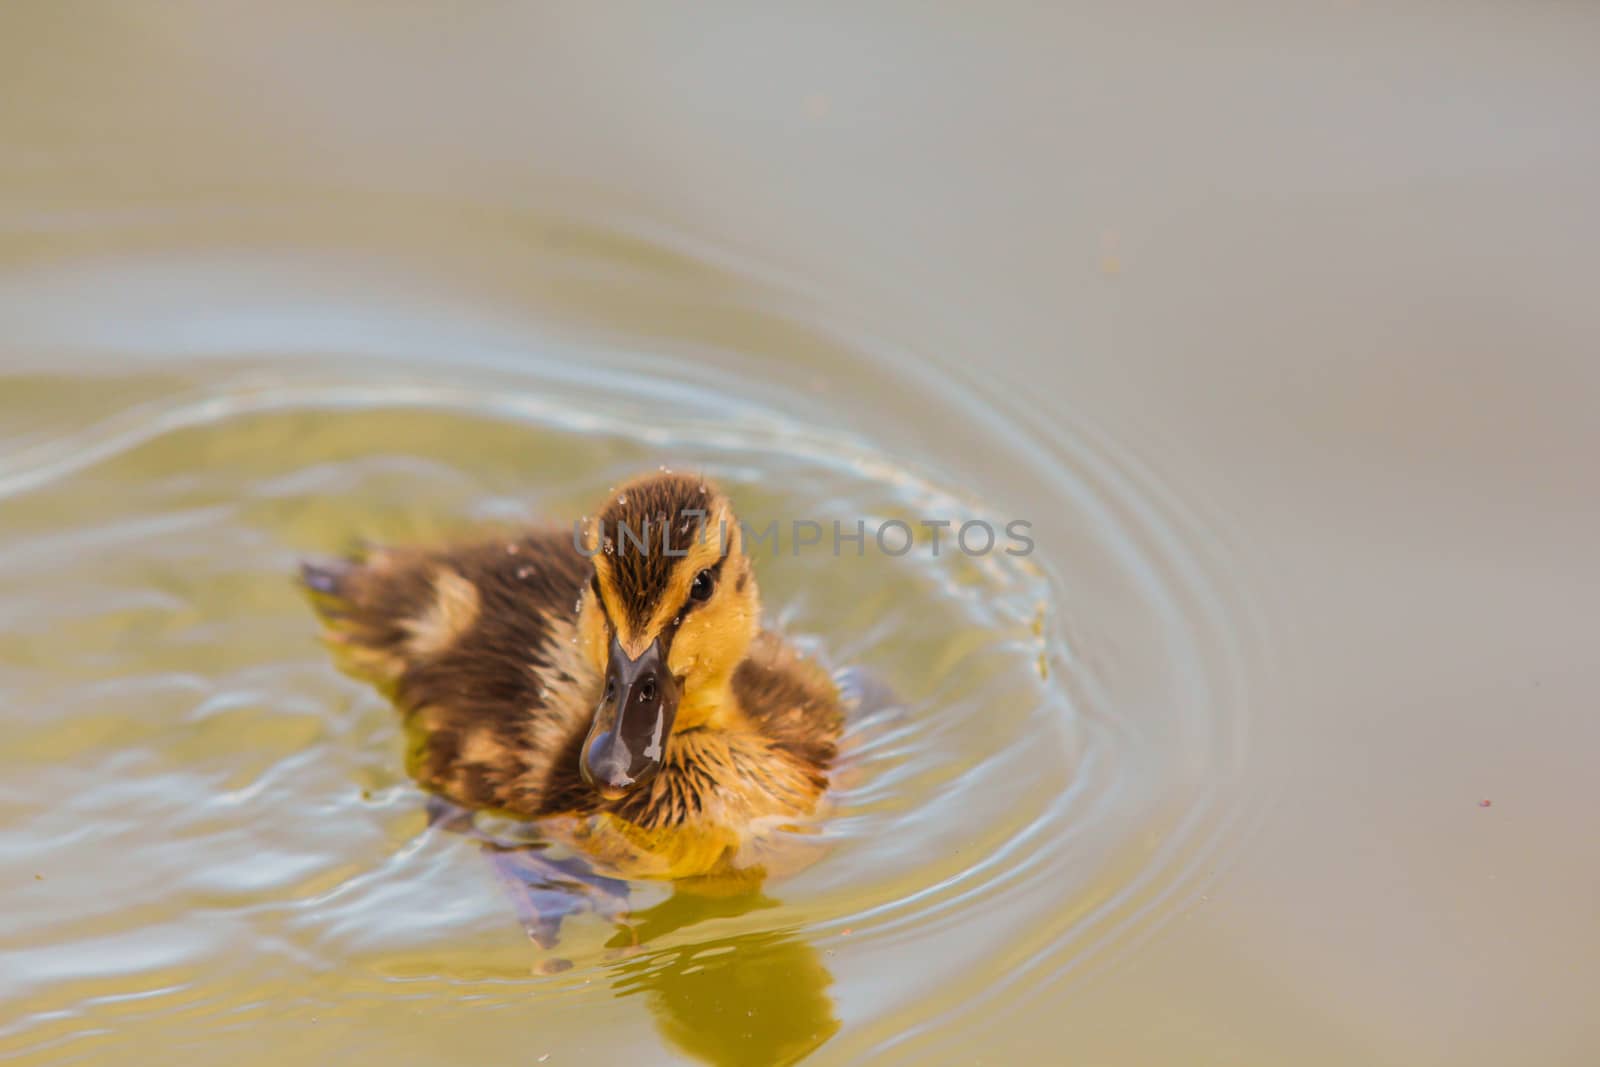 A yellow duckling swimming around by itself in blue water